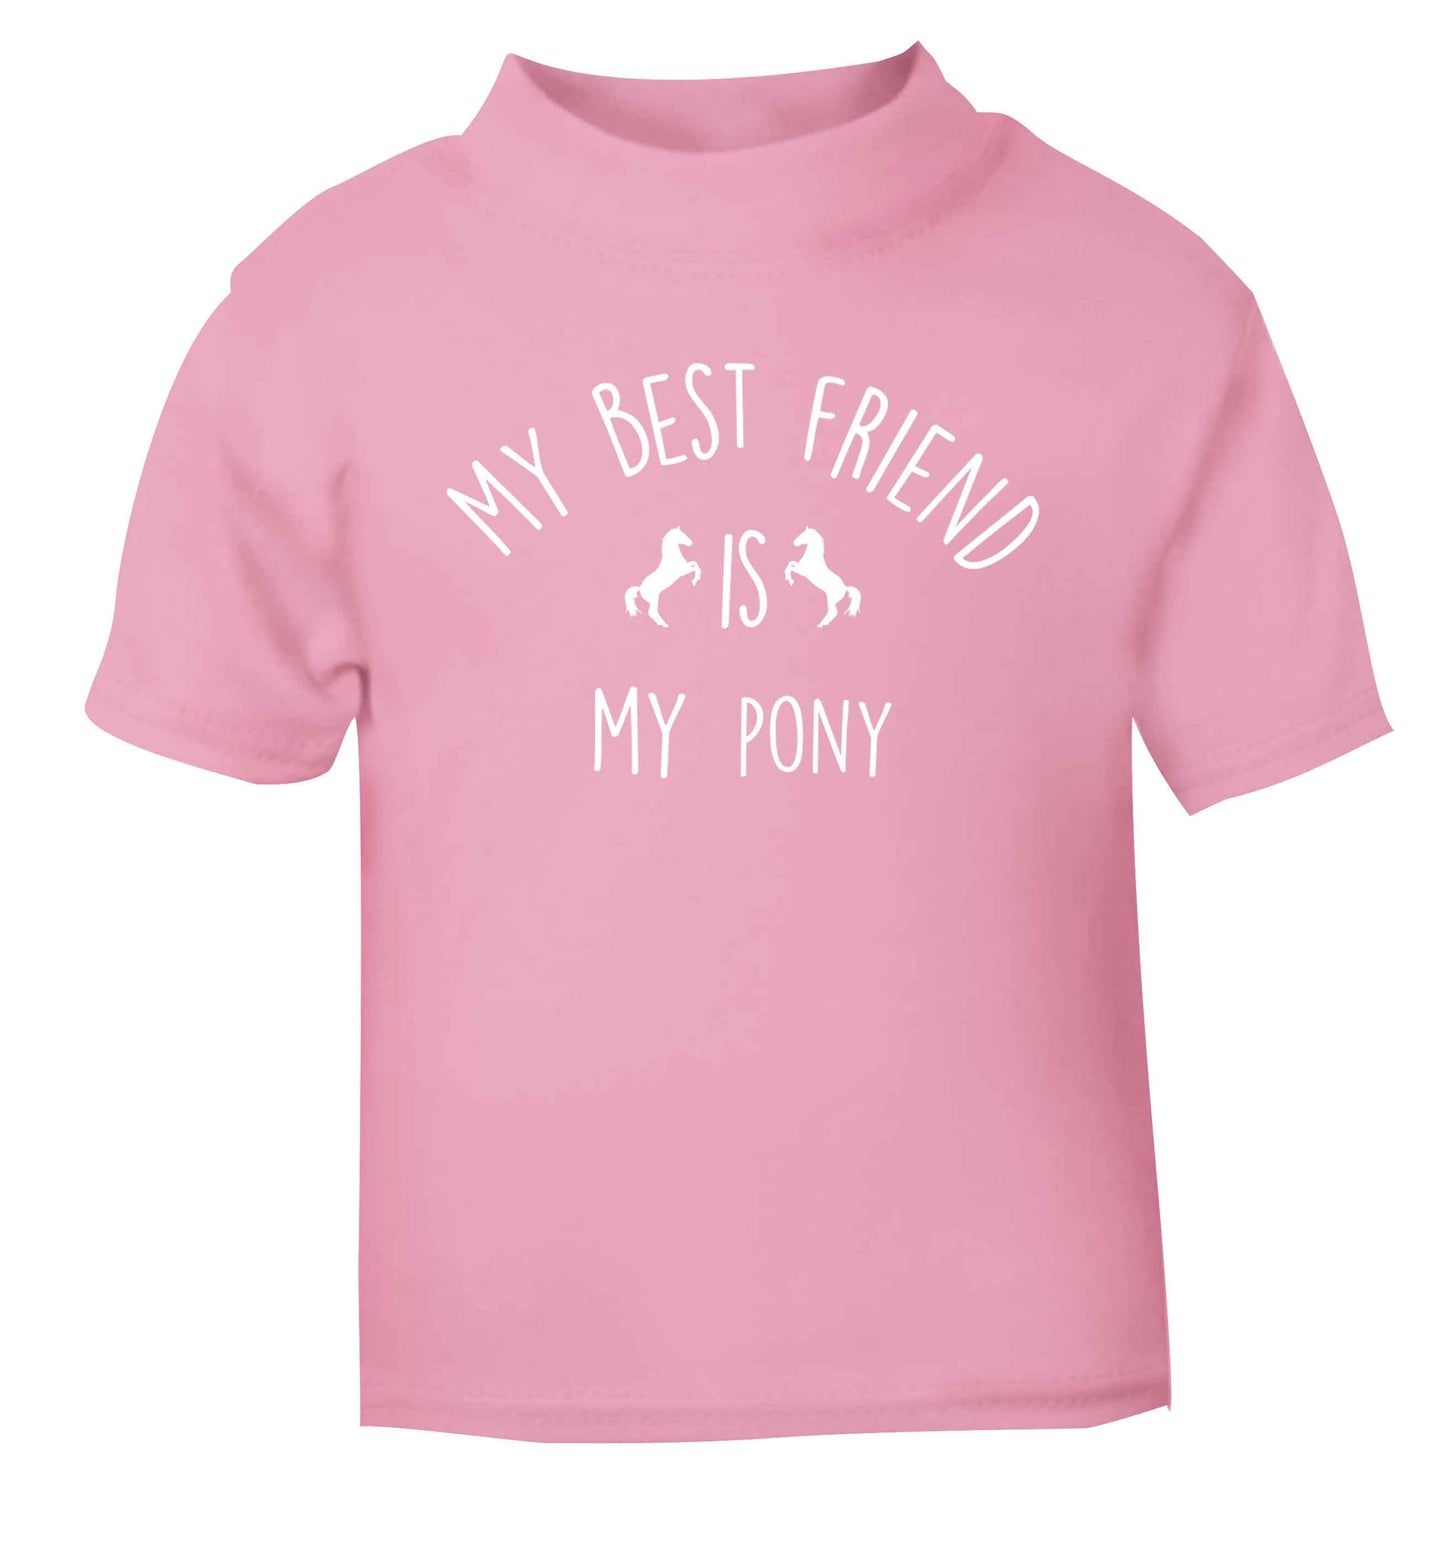 My best friend is my pony light pink baby toddler Tshirt 2 Years